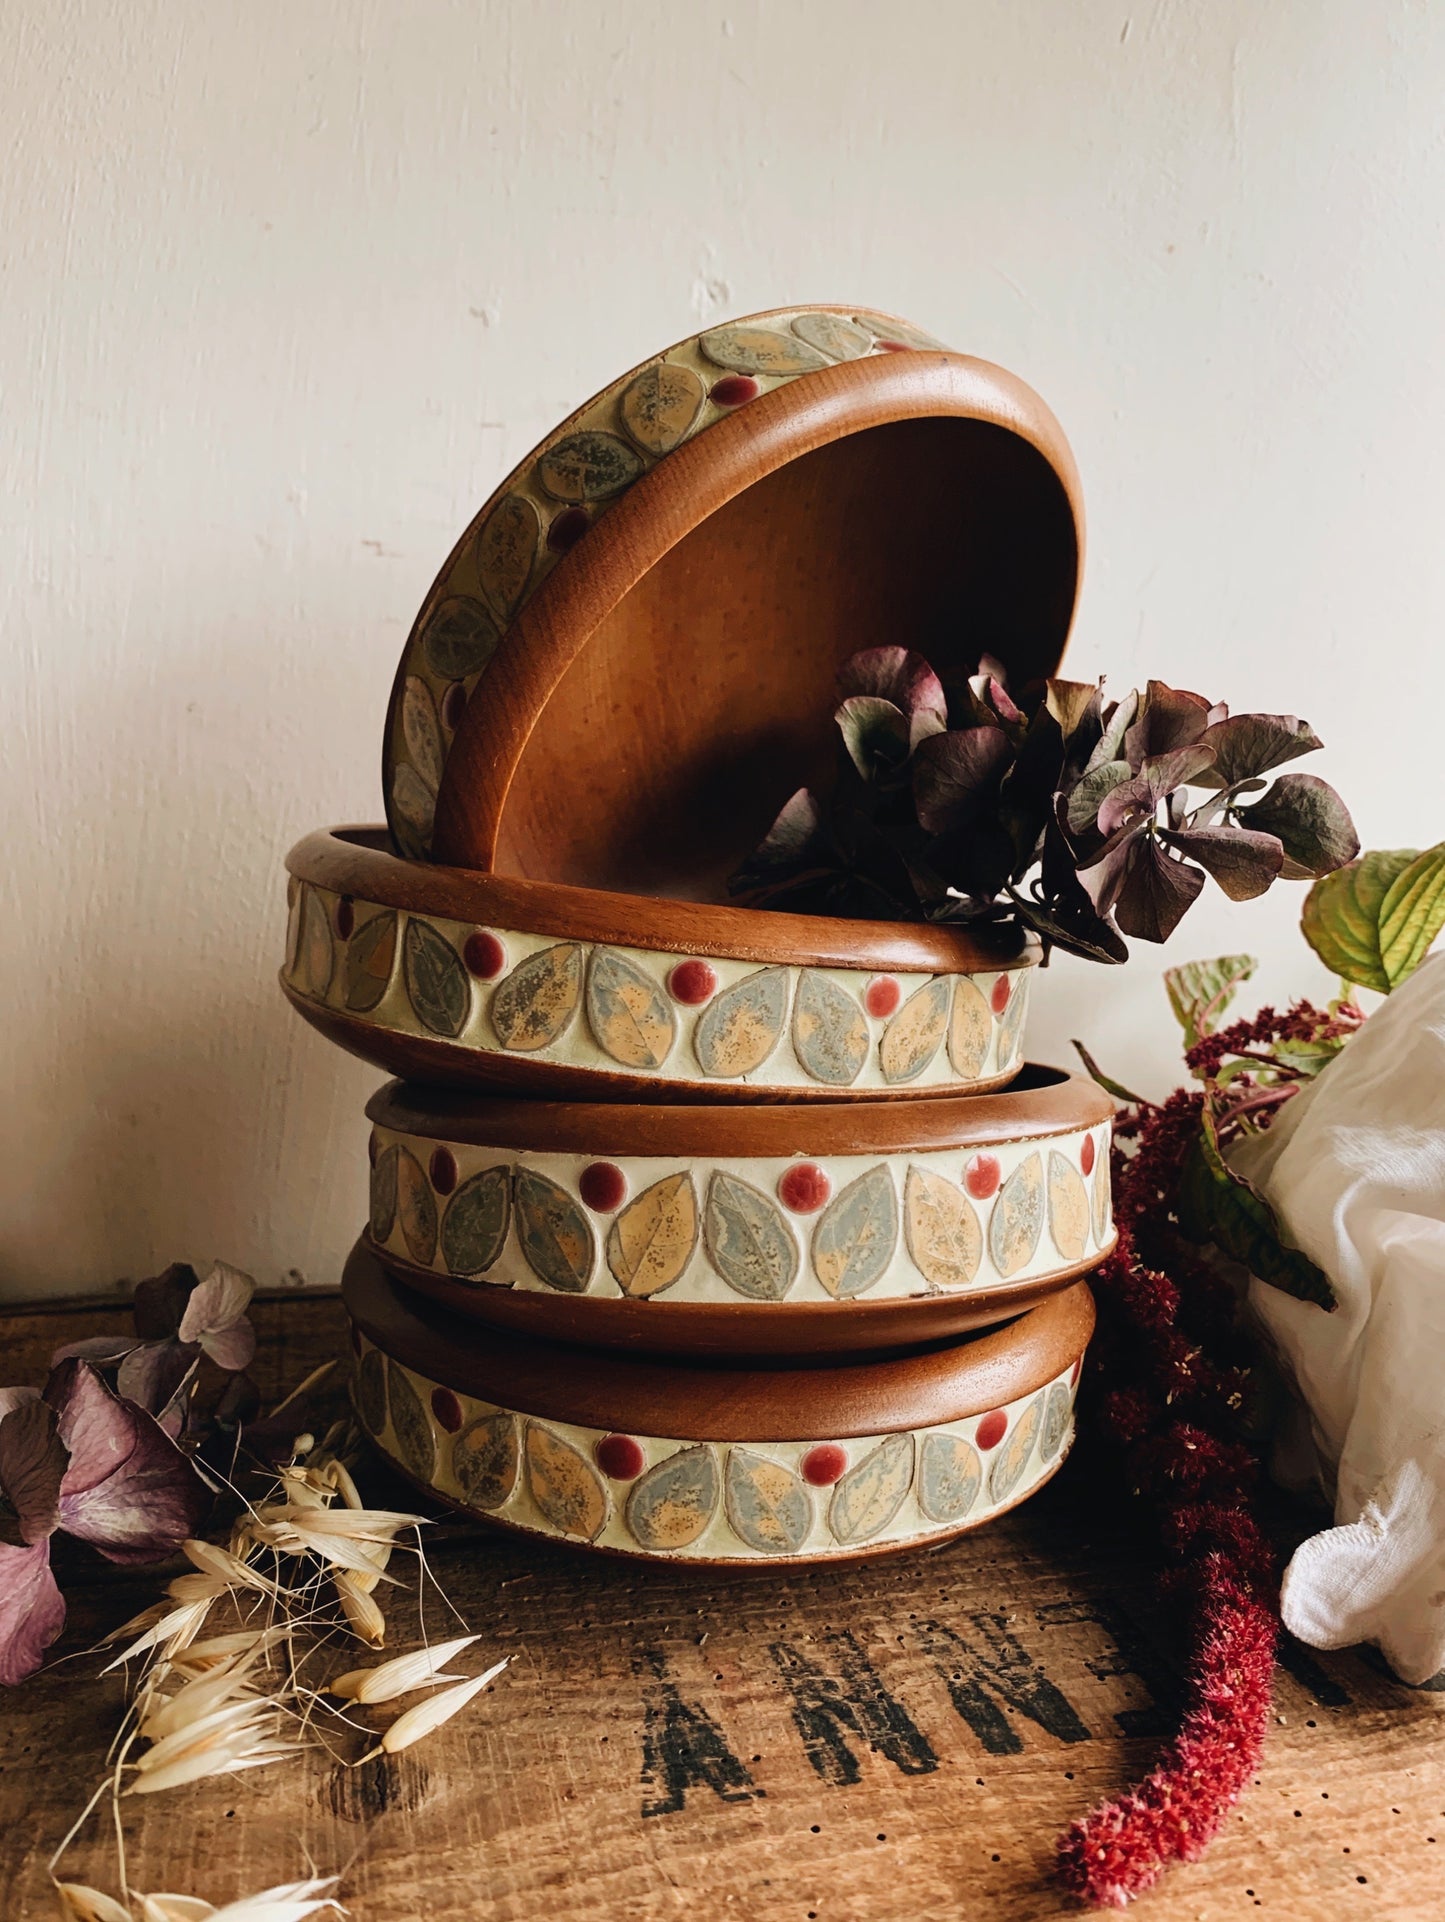 Rustic Decorative Wooden bowls (four available / sold separately)